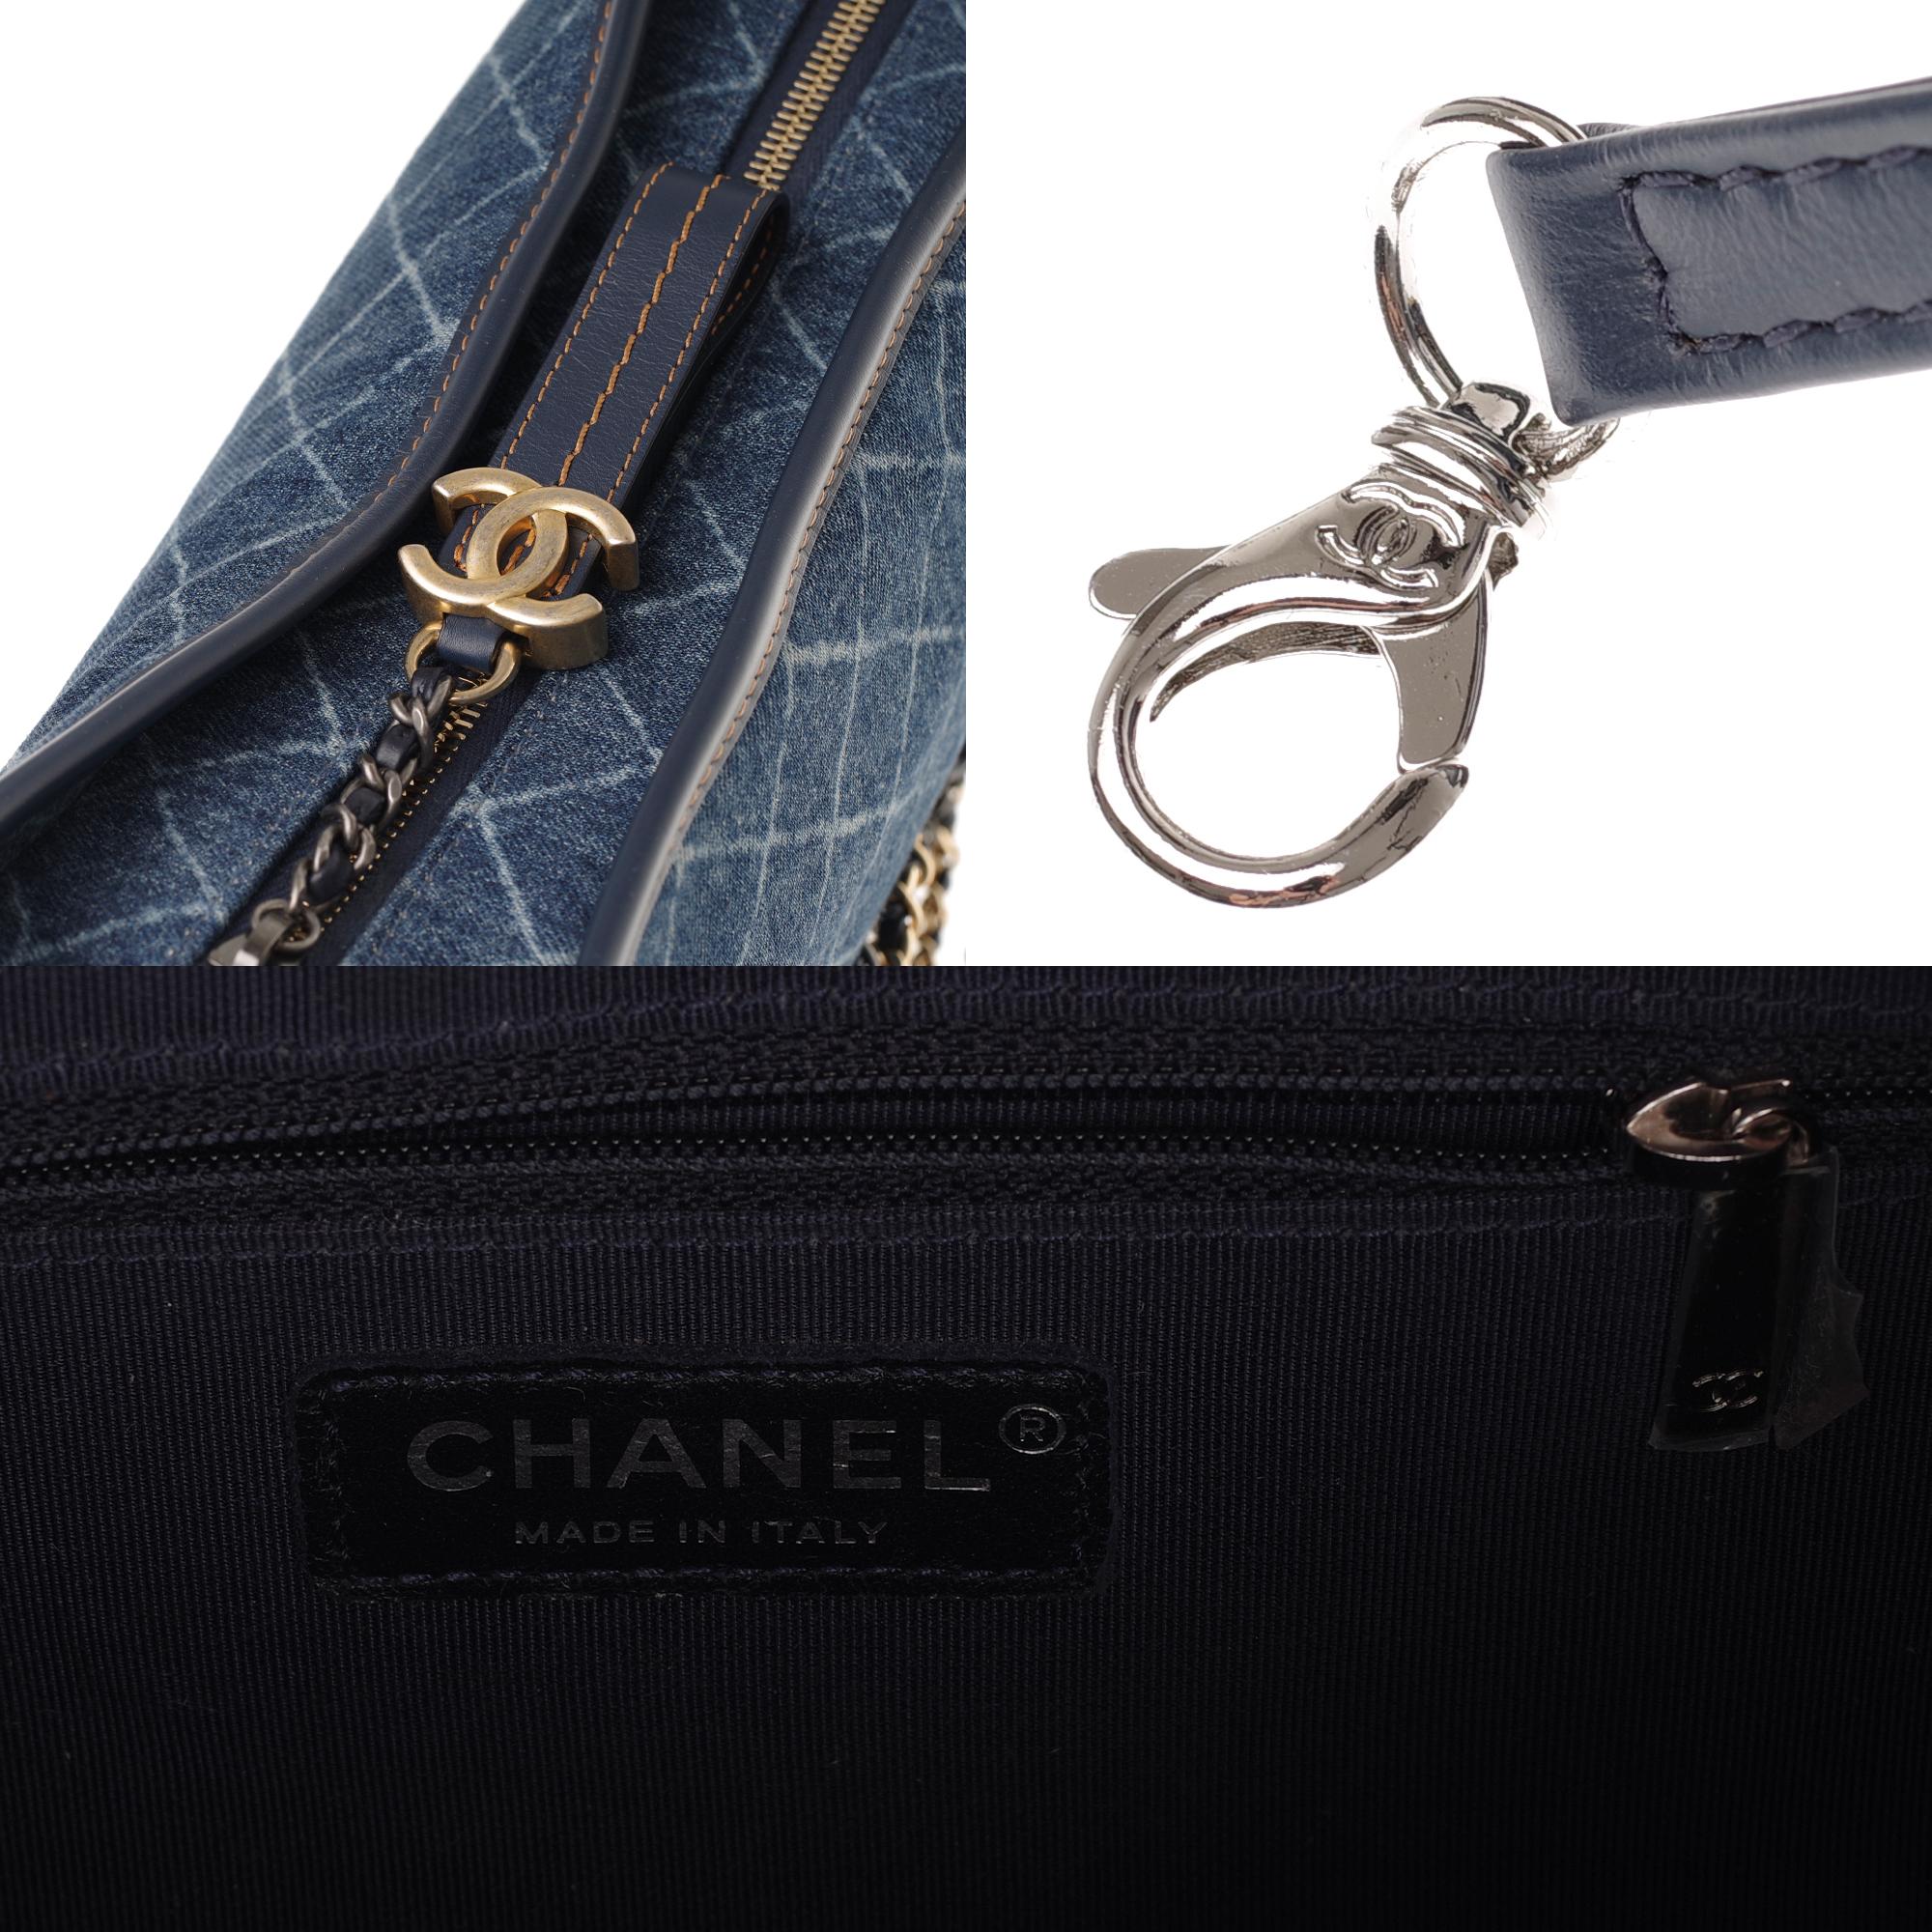 Black Chanel Gabrielle small size hobo bag in denim with gold and silver hardware